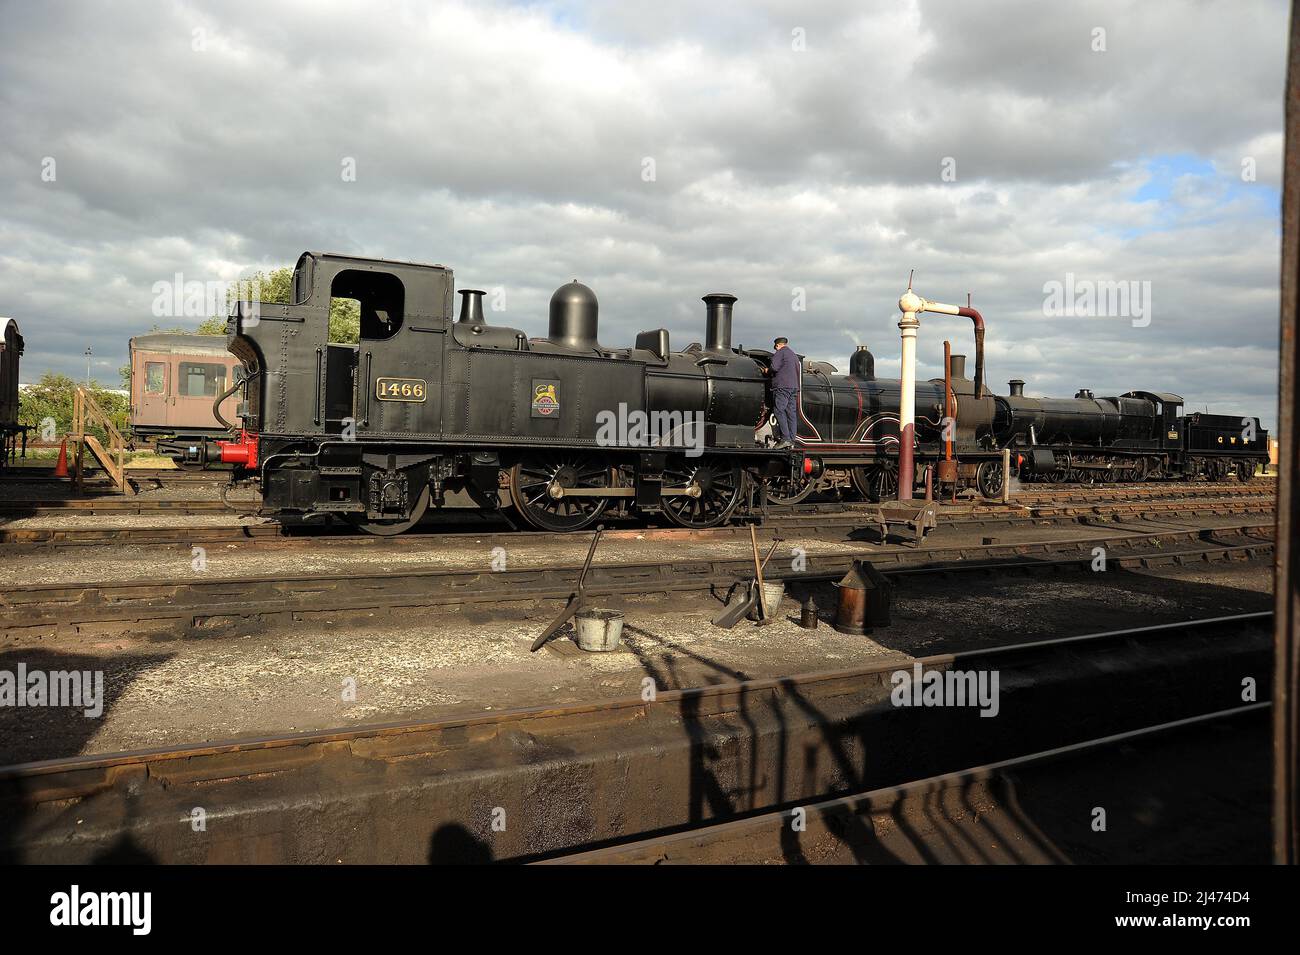 '1466', '30120' and '3822' on shed at Didcot. Stock Photo